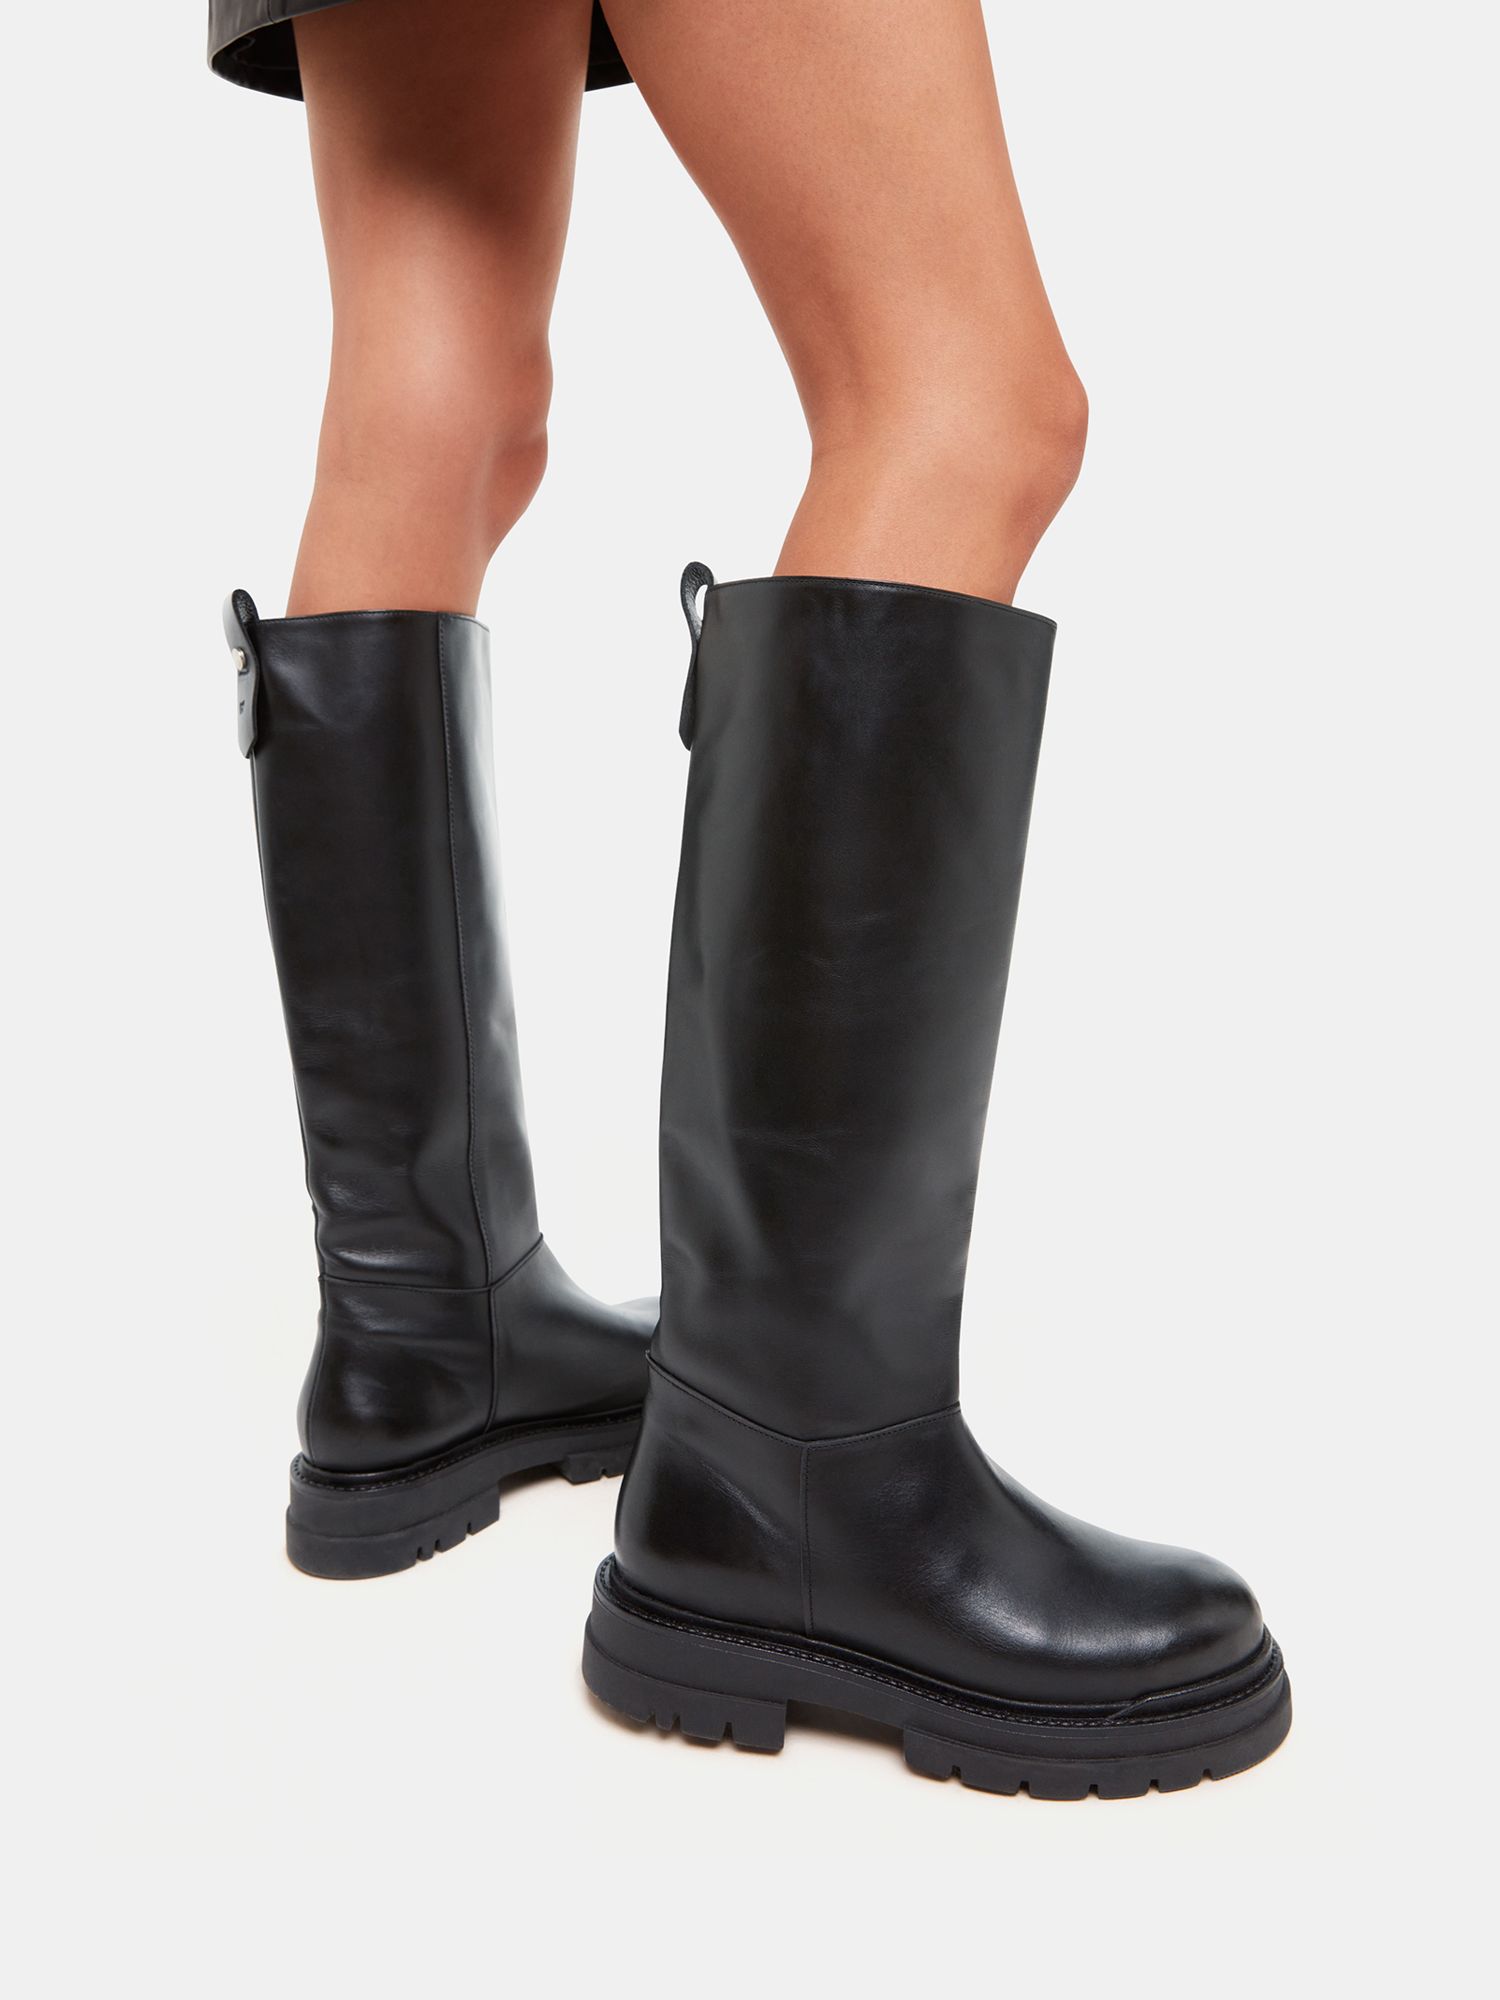 Whistles Maceo Lug Sole Leather Knee High Boots, Black at John Lewis ...